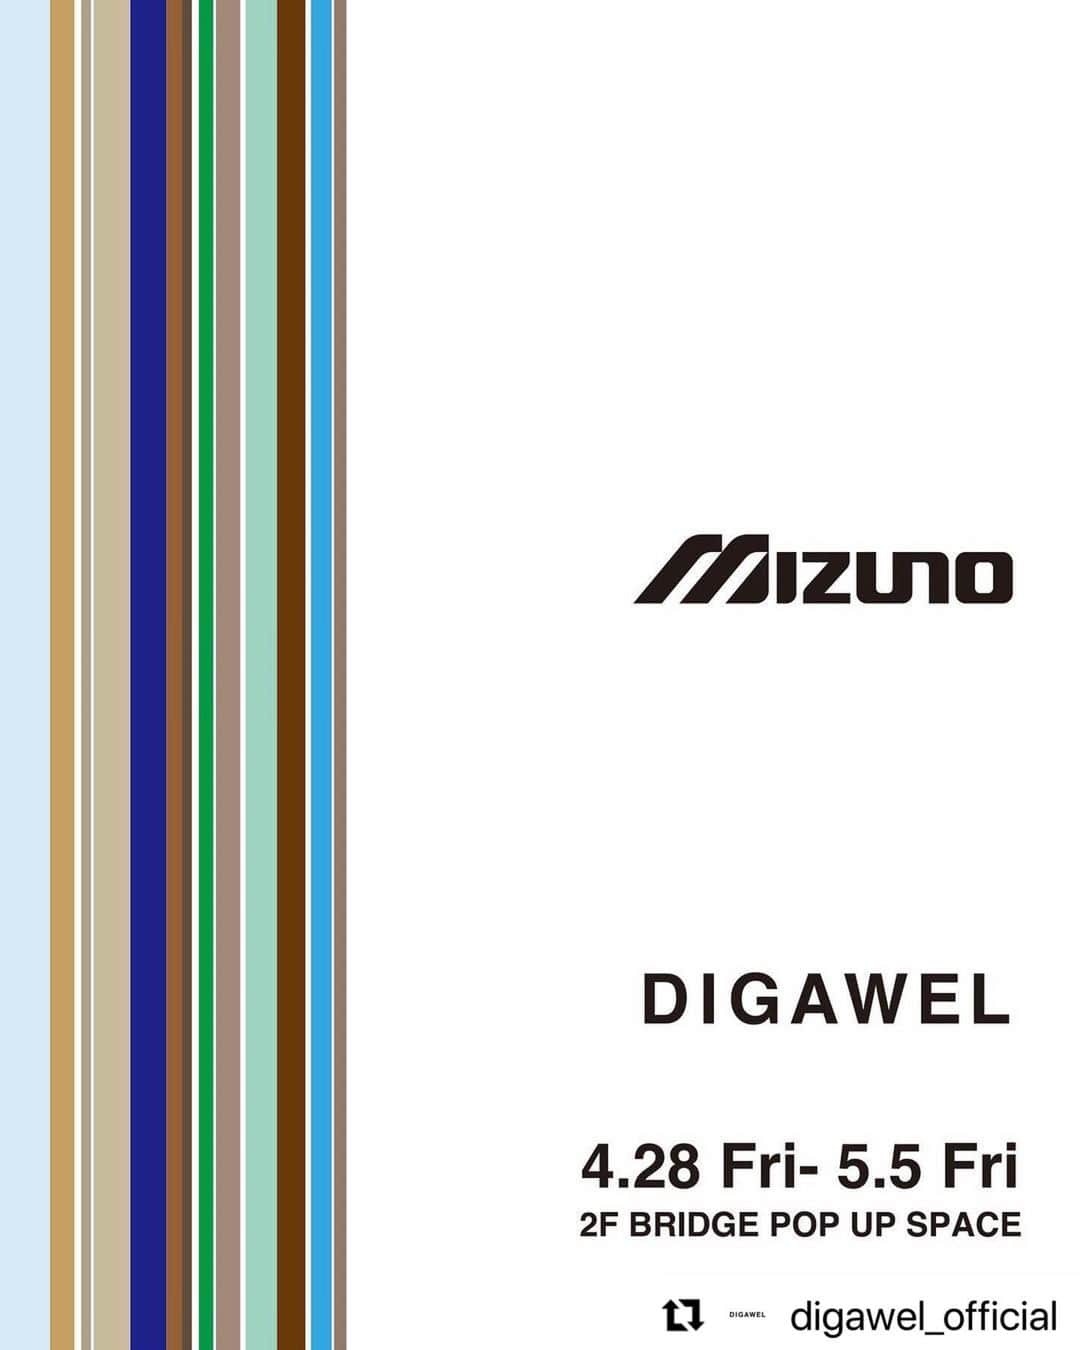 MIZUNO1906 Official Accountさんのインスタグラム写真 - (MIZUNO1906 Official AccountInstagram)「【MIZUNO×DIGAWEL】 〝渋谷PARCO POP UP SHOP 〟 ⁡ 『WAVE RIDER β DIGAWEL』の発売にあたりPOP UP SHOPを開催します。 ⁡ DIGAWELデザイナー西村浩平が期間中は毎日在店します。 UNION×DIGAWEL”BETA COLLECTION”のアイテム以外にもDIGAWEL 23SSシーズンの商品も店頭に並びます。 また、WAVE RIDER β DIGAWELのレディースサイズは渋谷PARCOのみでの販売となります。(レディースサイズは23.5/24.0のみ) デザイナーと直接会える貴重な機会となりますのでぜひお越しください。 ⁡ 期間 2023/4/28(Fri)~5/5(Fri) ⁡ 店舗 渋谷PARCO 2F BRIDGE POP UP SPACE ⁡ ⁡ #digawel  #DIGAWEL #渋谷パルコ #PARCO ⁡ POP UP SHOP at Shibuya PARCO, a "Designer You Can Go to See". ⁡ POP UP SHOP will be held on the occasion of the release of "WAVE RIDER β DIGAWEL". ⁡ DIGAWEL designer Kohei Nishimura will be at the store every day during the period. In addition to items from the UNION×DIGAWEL "BETA COLLECTION", products from the DIGAWEL 23SS season will also be available at the store. WAVE RIDER β DIGAWEL women's sizes will be sold only at Shibuya PARCO. (Women's size is 23.5/24.0 only) This will be a rare opportunity to meet the designer in person, so please come and visit us. ⁡ Date April 28 (Fri) - May 5 (Fri) ⁡ Store Shibuya PARCO 2F BRIDGE POP UP SPACE  #union #uniontokyo  #Mizuno #ミズノ #美津濃 #MizunoSportstyle #mizunotokyo #mizunoosaka #mizunokyoto #渋谷 #shibuyaparco #shibuyashopping @mizuno_sportstyle_jp  @digawel_official」4月28日 23時41分 - mizuno_sportstyle_jp